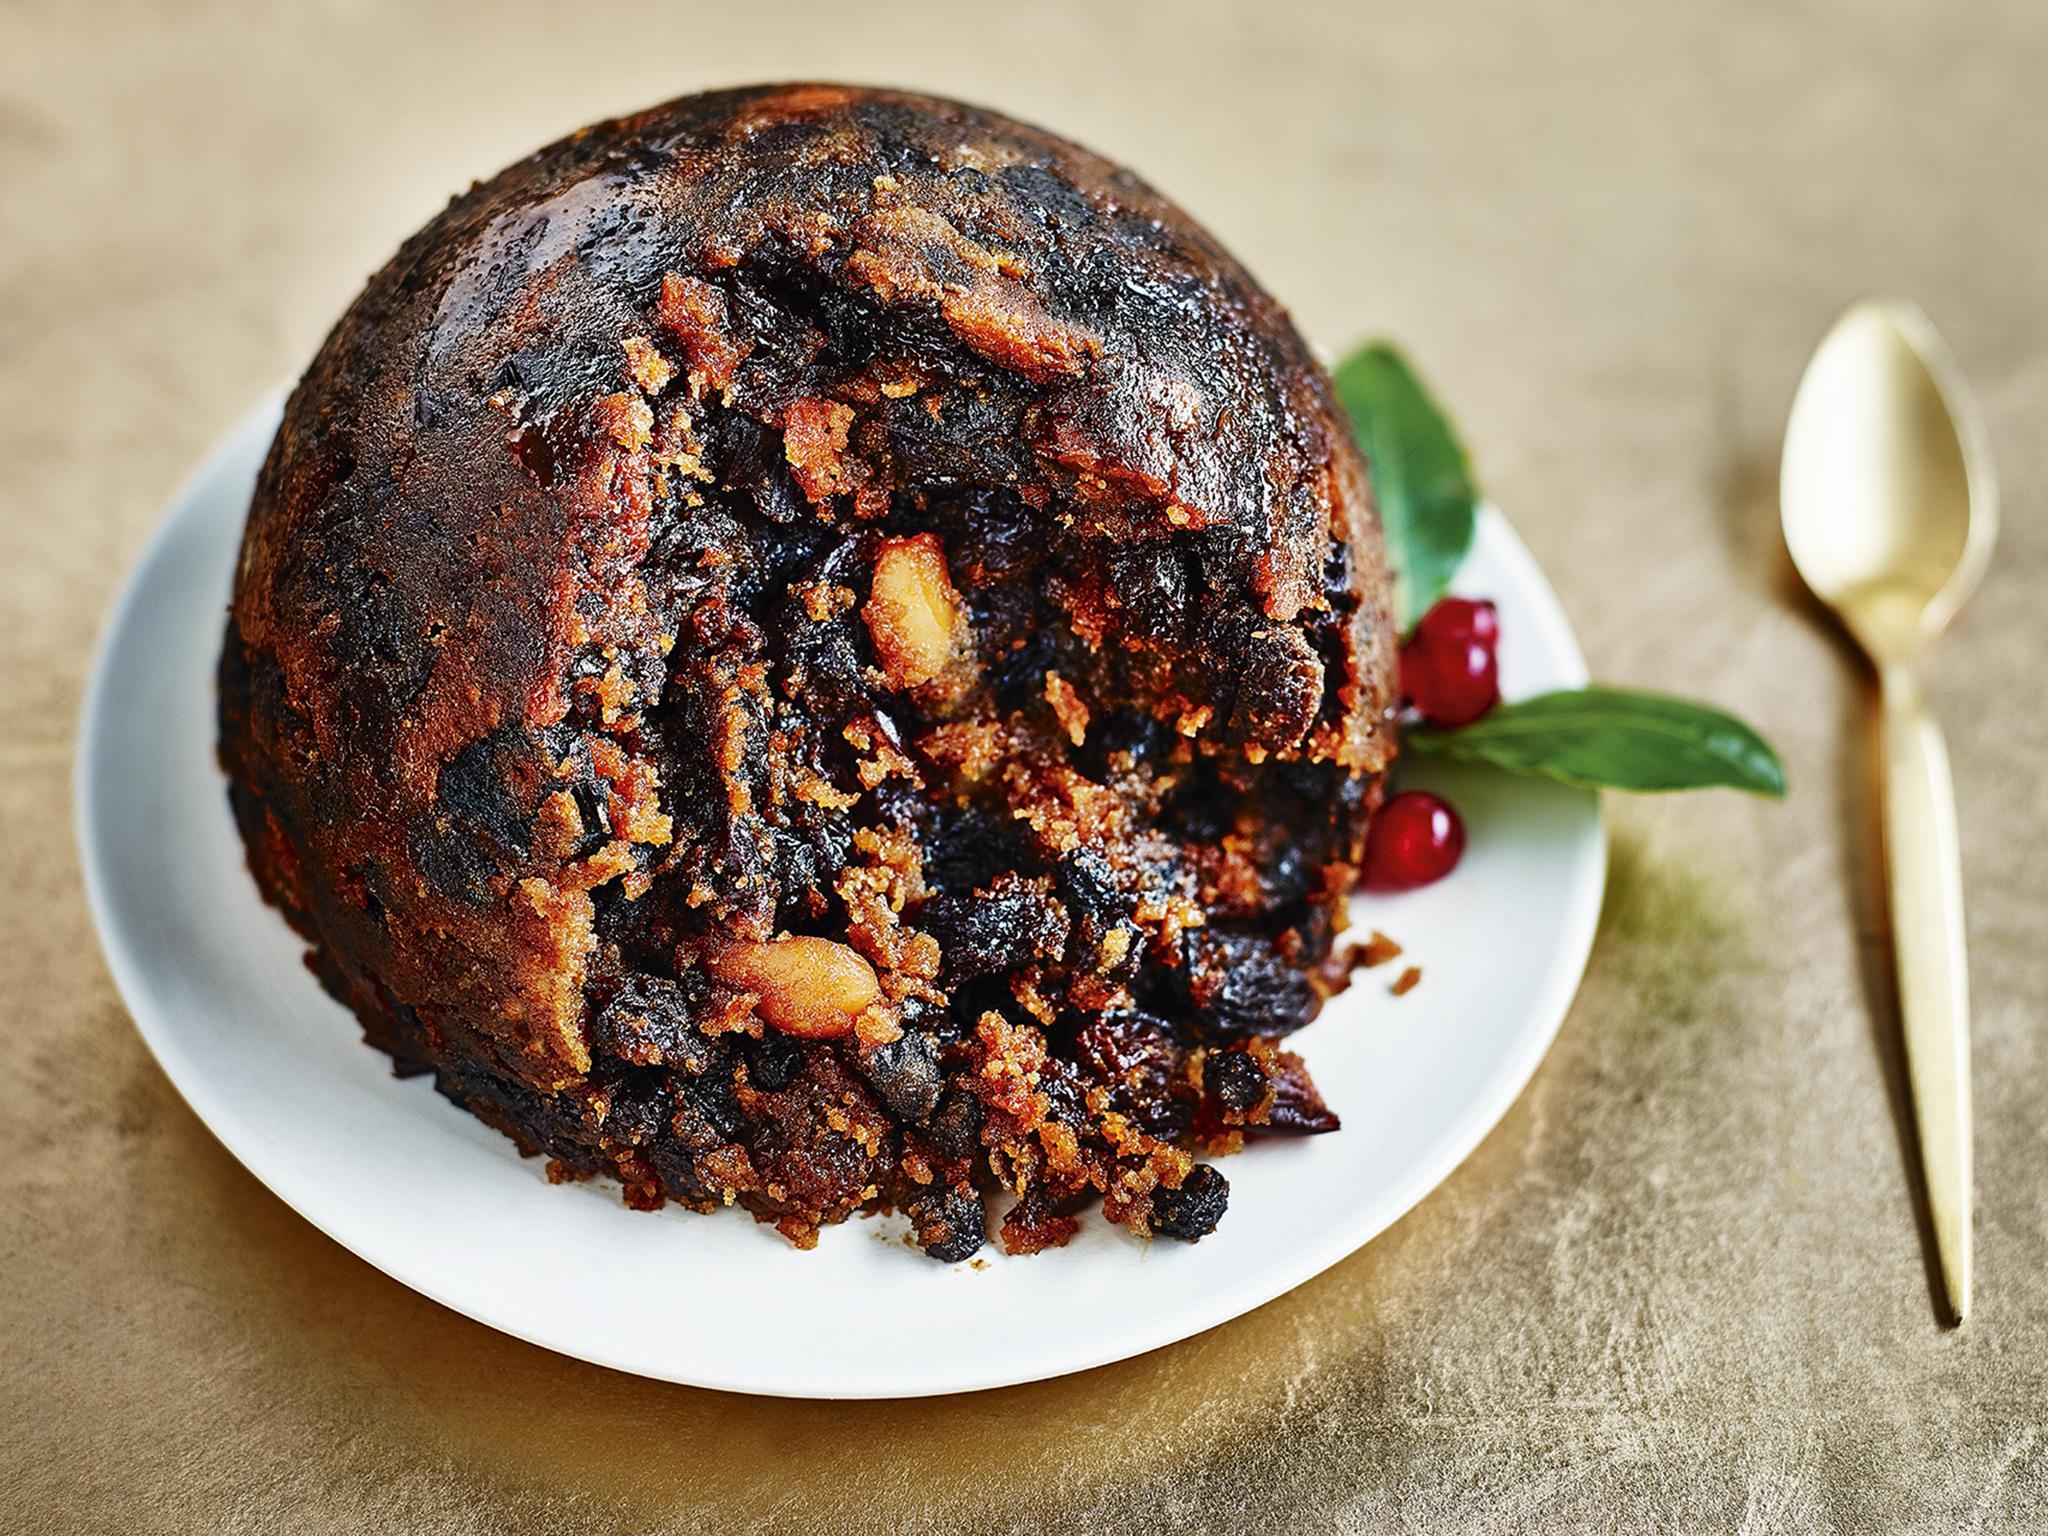 best Christmas puddings